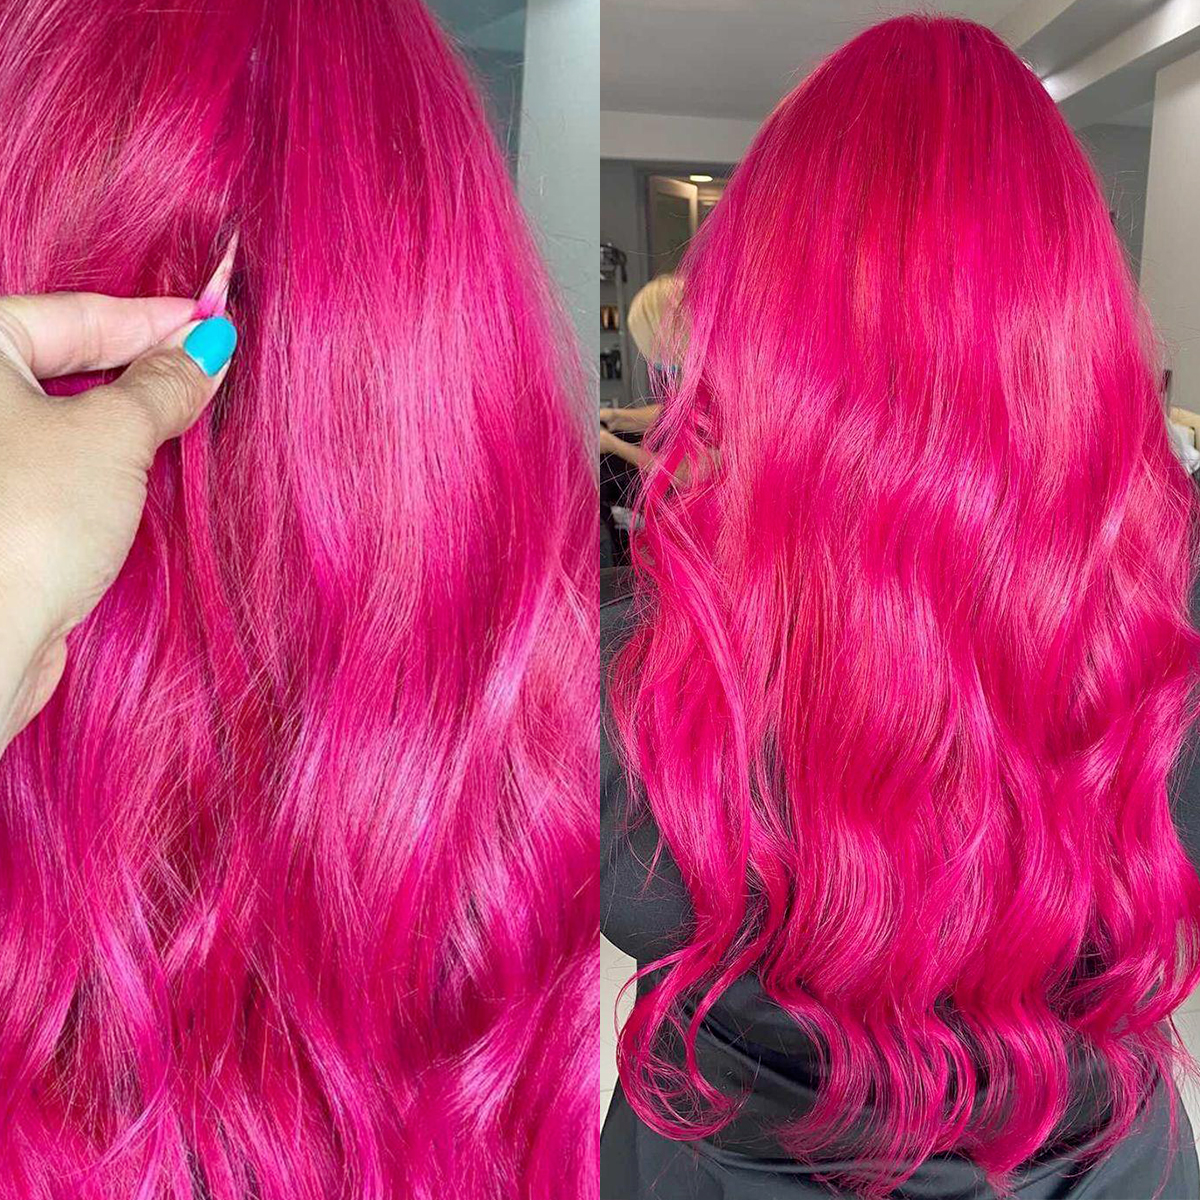 Pink hair extensions: ombre trend, mermaid color, pastel and light